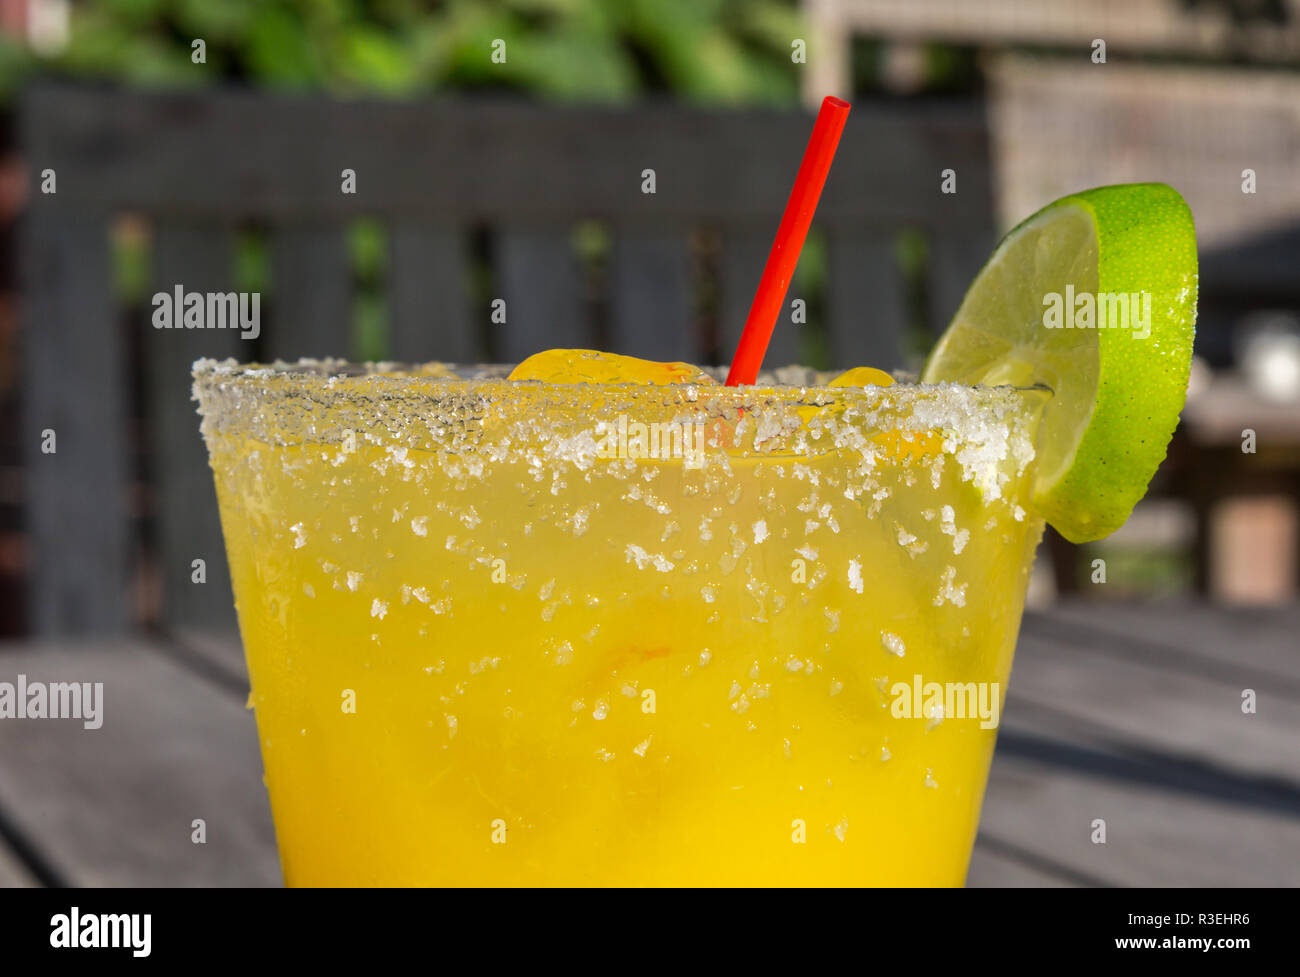 yellow colored cocktail with salt and lime on the rim Stock Photo